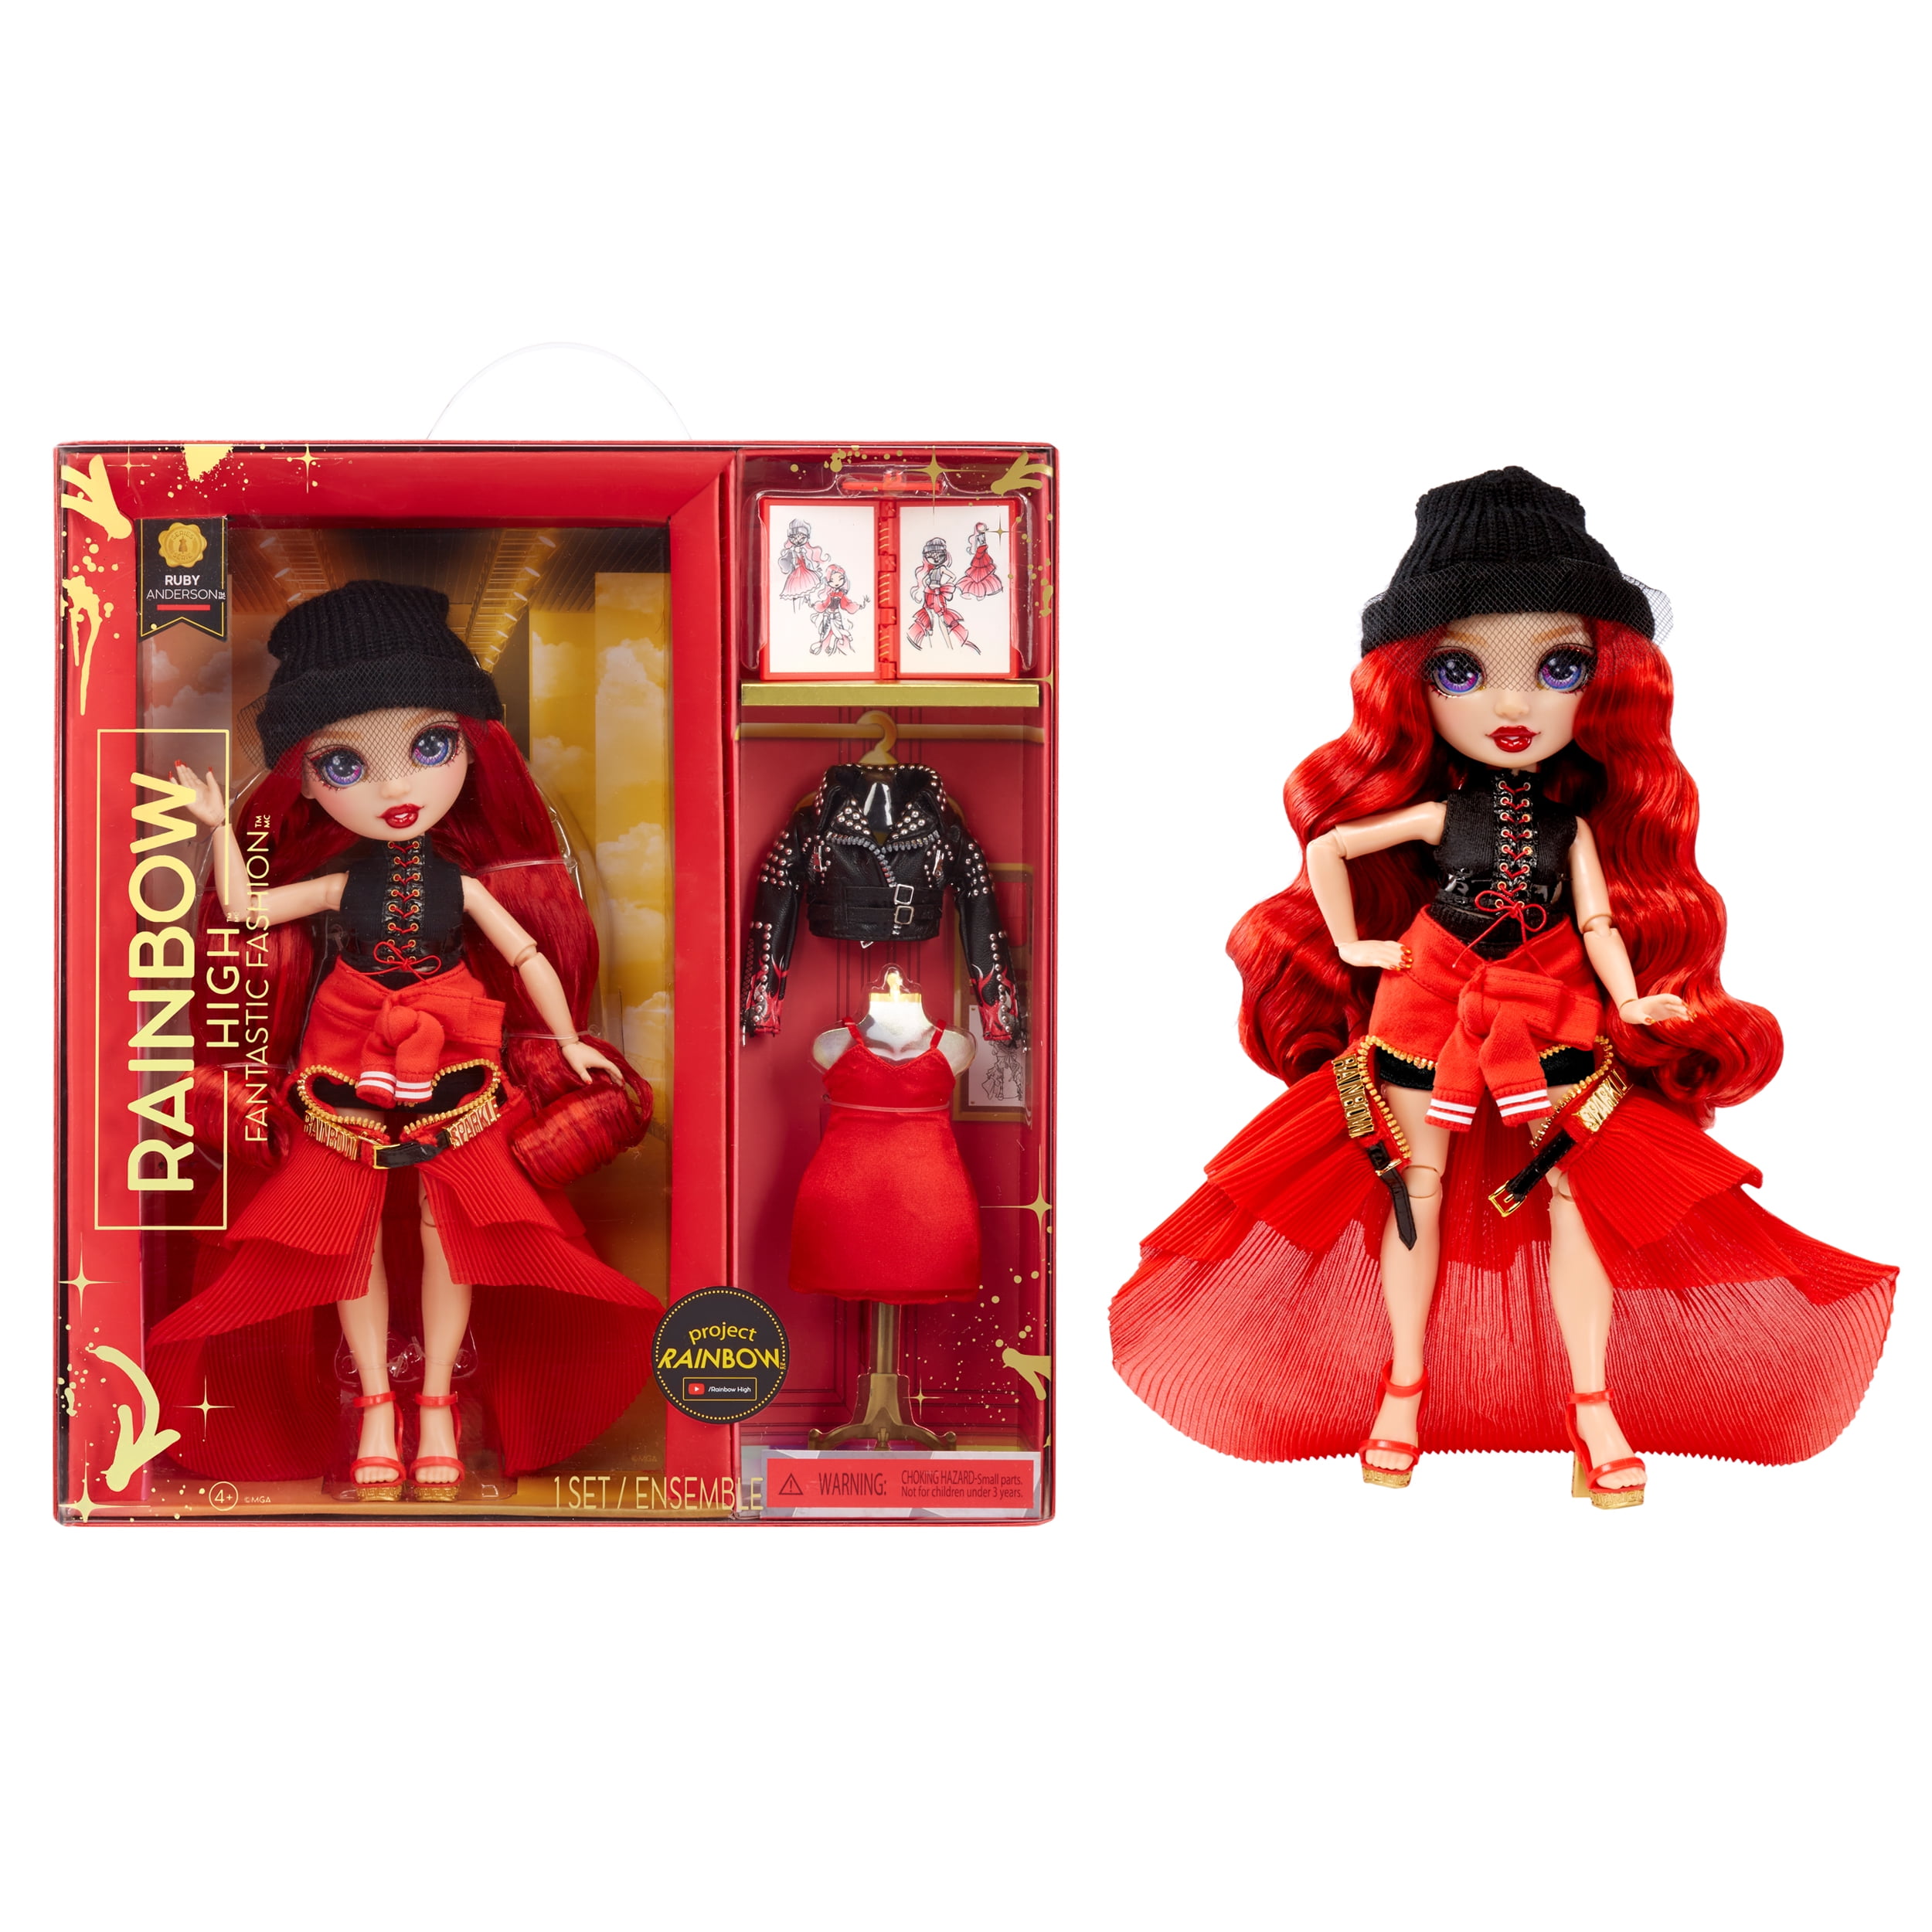  Rainbow High Jr High Ruby Anderson- 9-inch RED Fashion Doll  with Doll Accessories- Open and Closes Backpack, Great Gift for Kids 6-12  Years Old and Collectors : Toys & Games